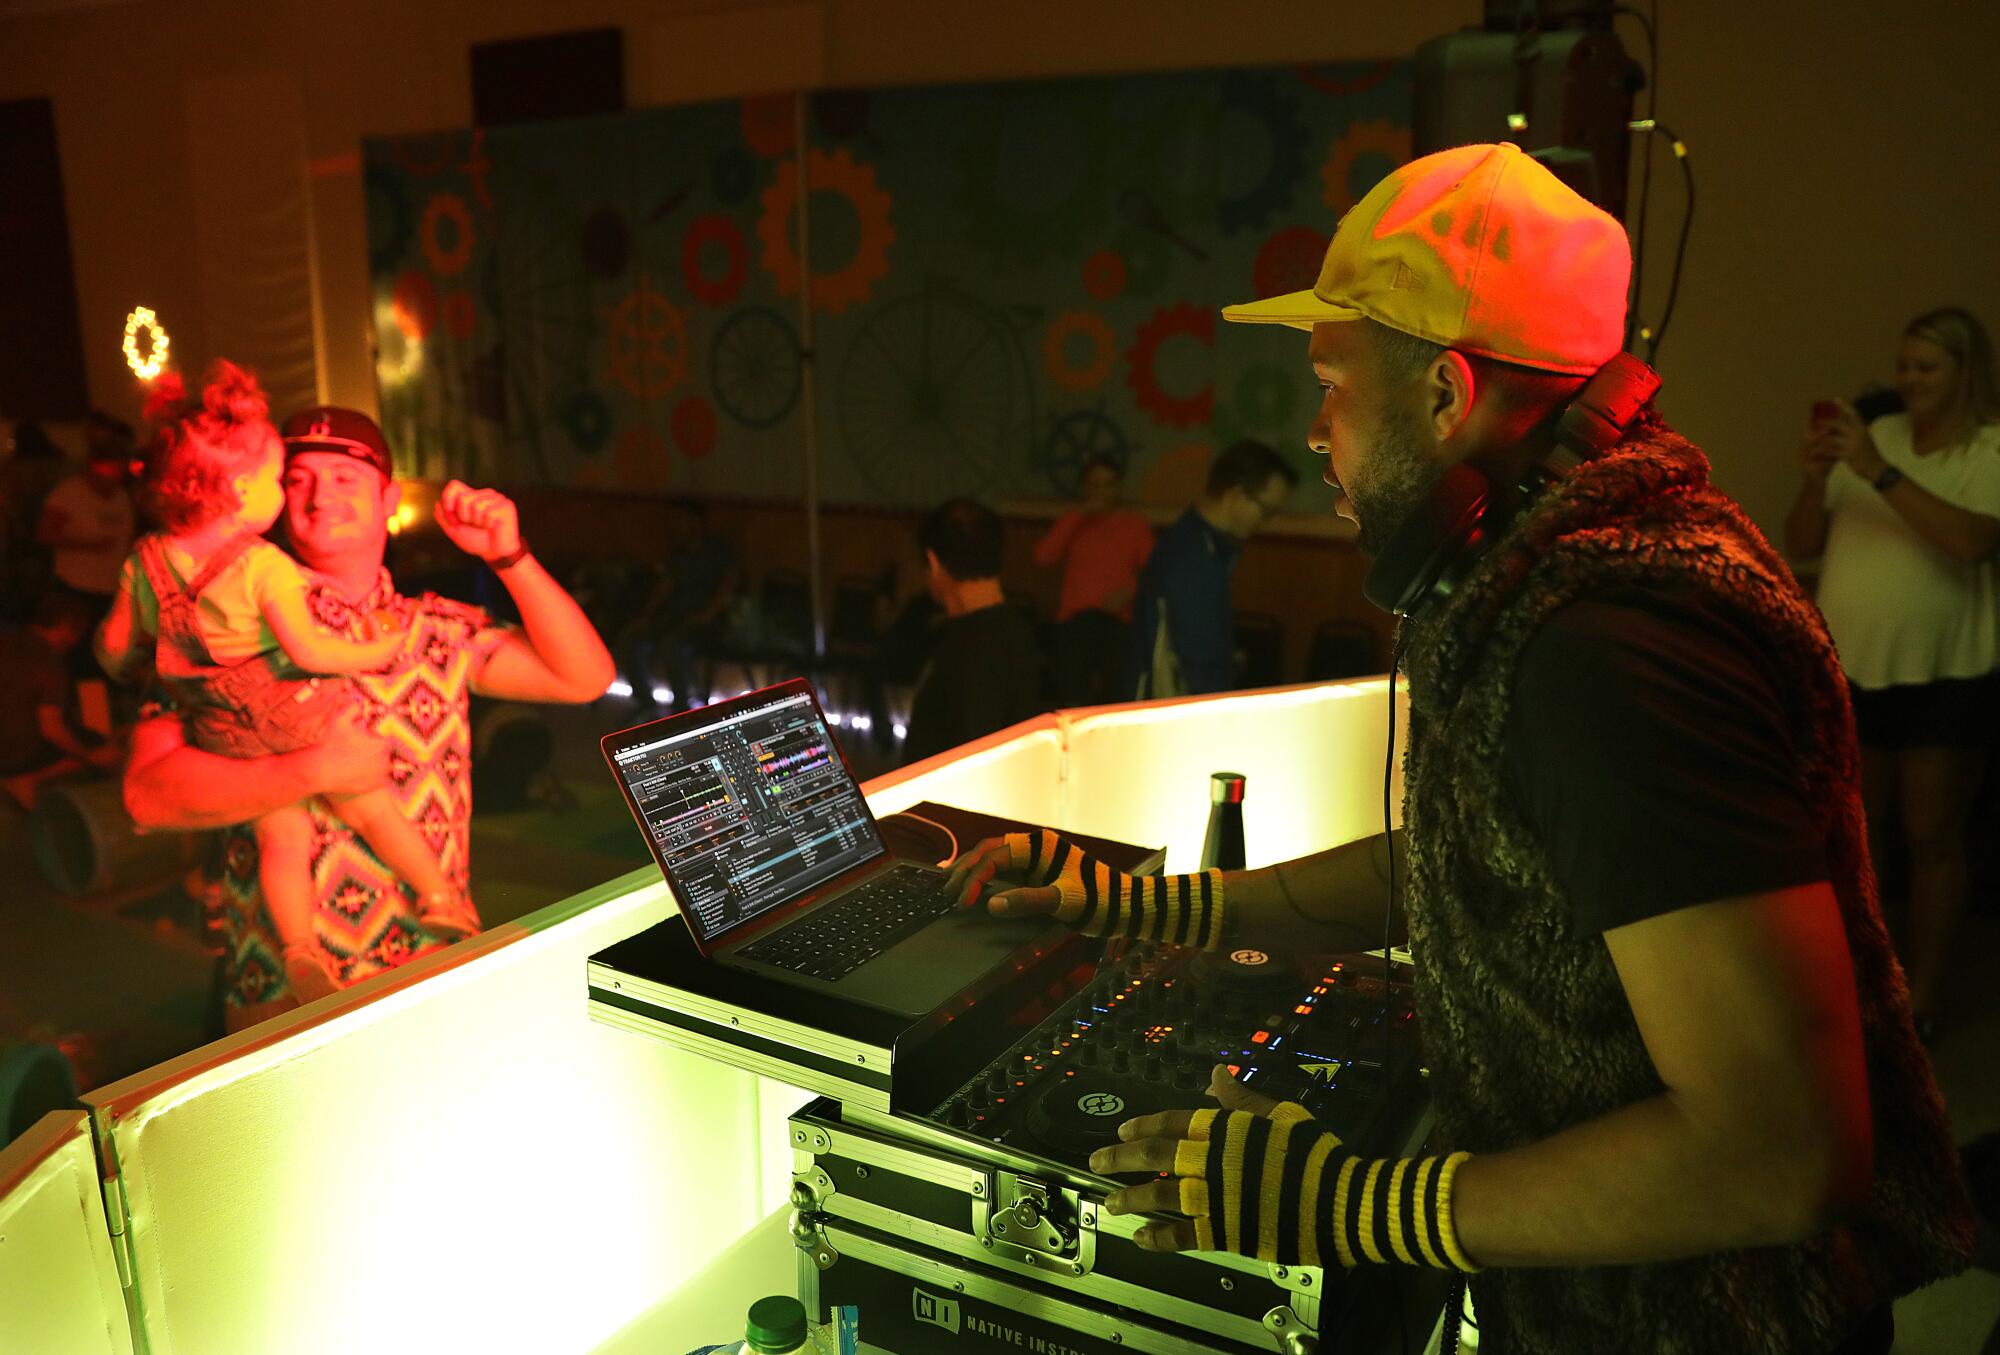 Edward Hazzard, a.k.a. DJ E.T., provides the music at the Baby Raves.